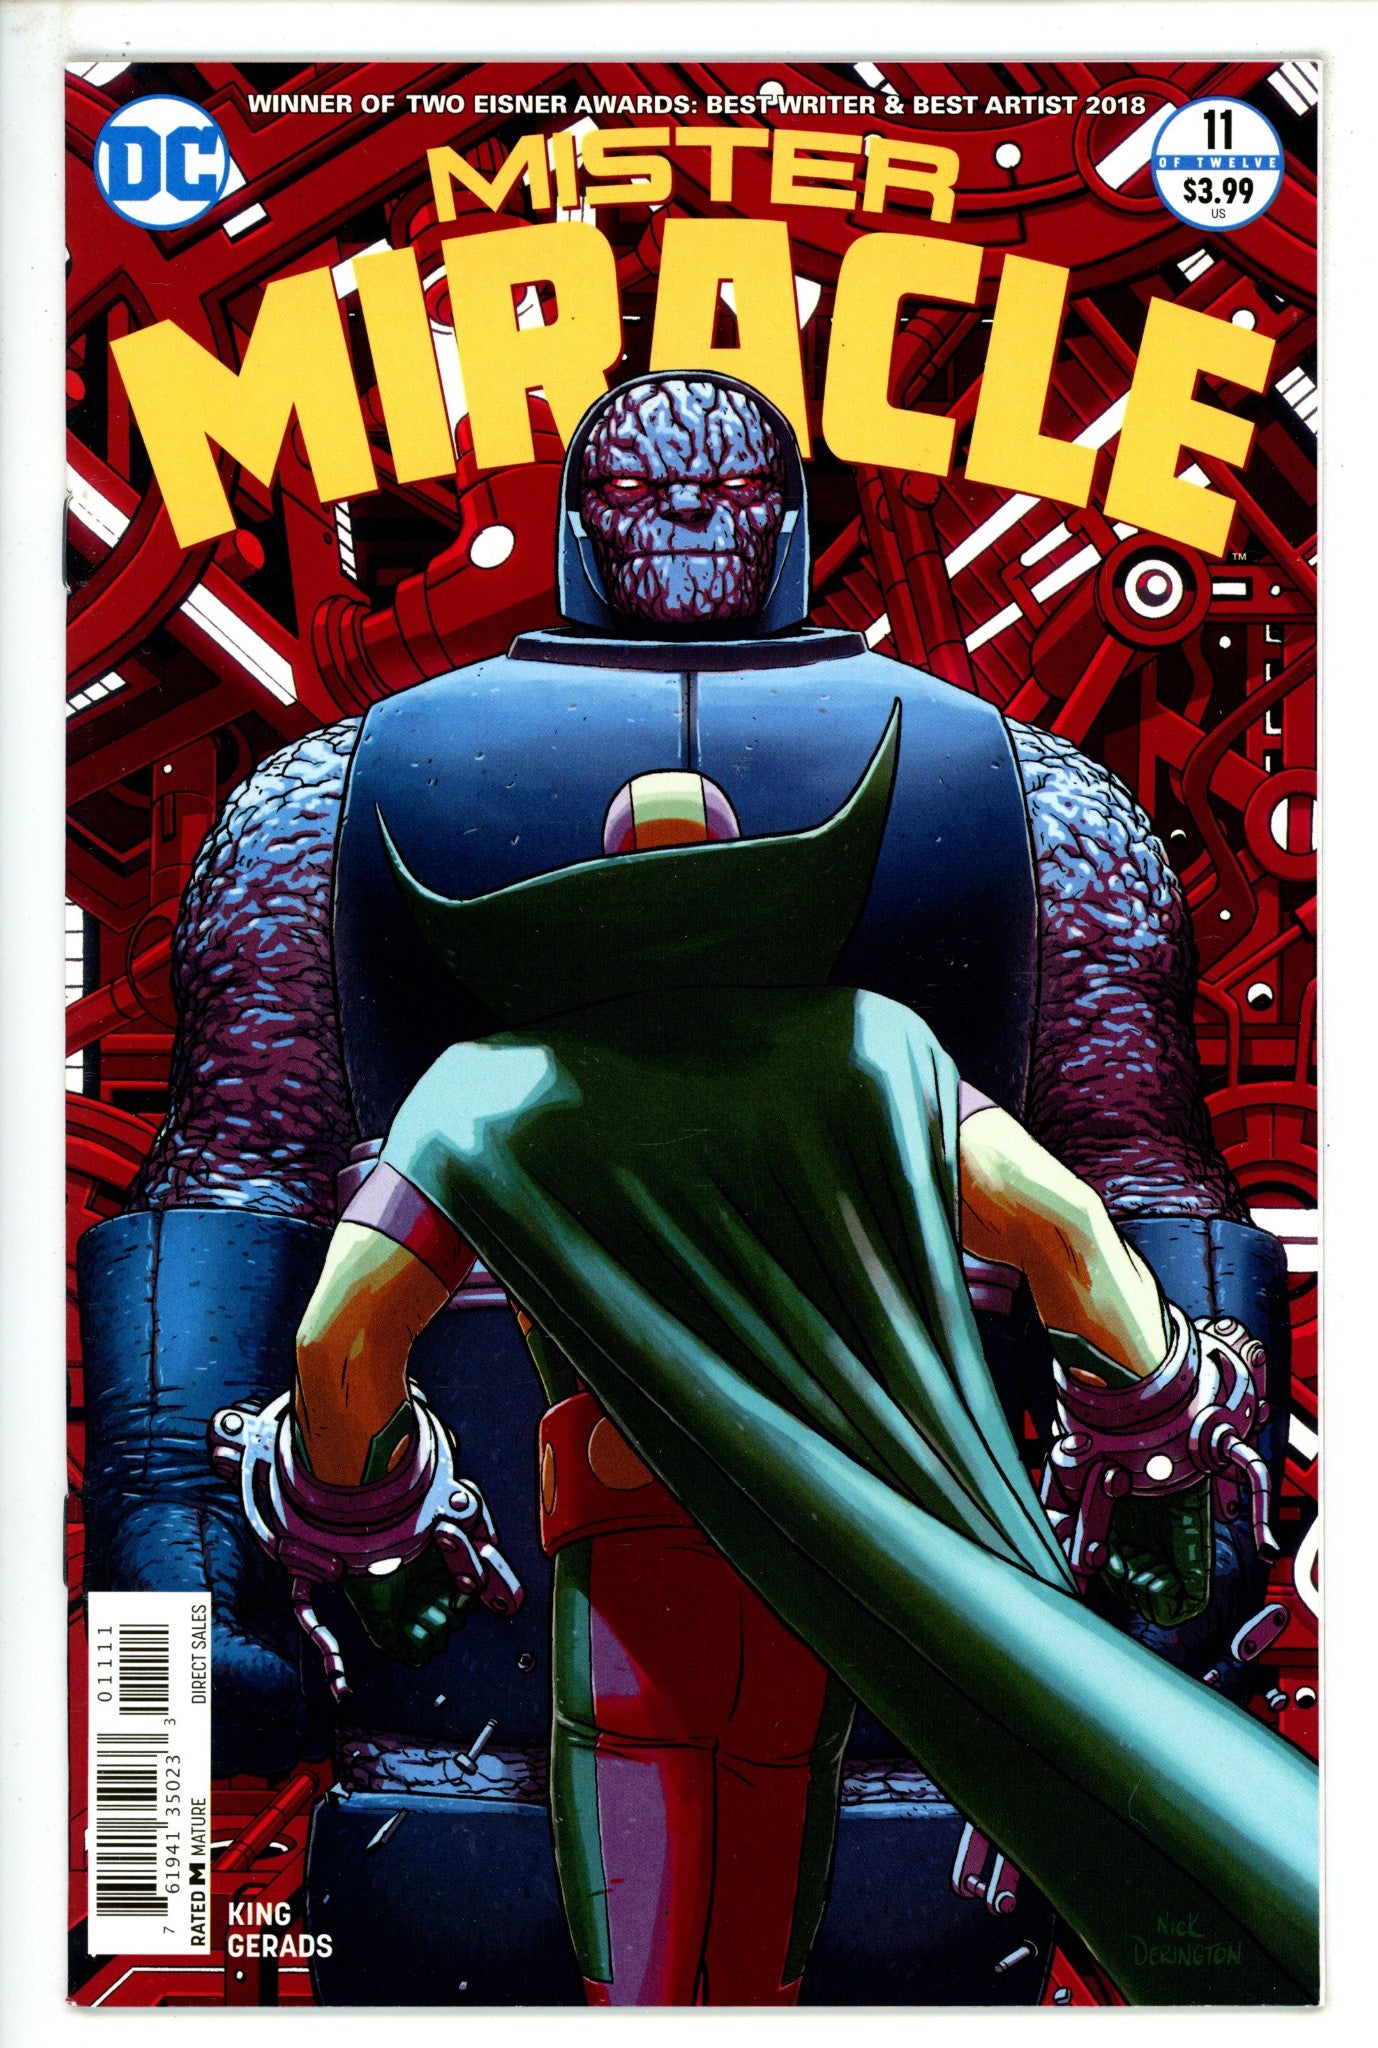 Mister Miracle Vol 4 11 High Grade (2018) 